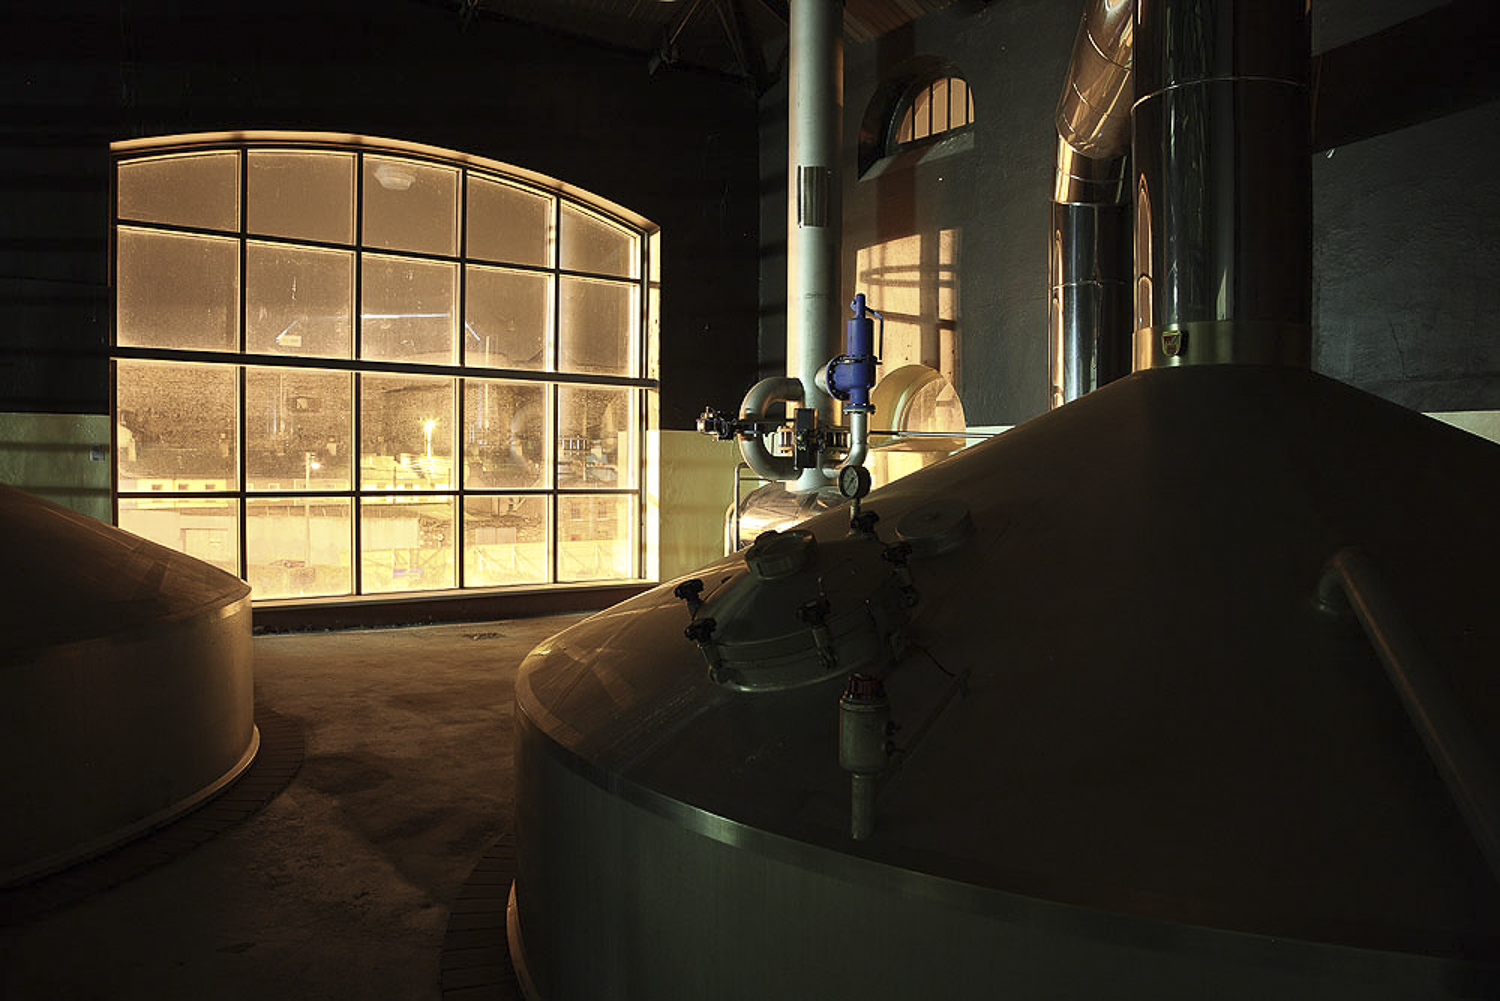 Huppmann pre-run vessel and Kettle - Brewhouse;    After lauthering the wort was transferred to the pre-run tank before been transferred to the kettle where hops would be added  for flavour and aroma.